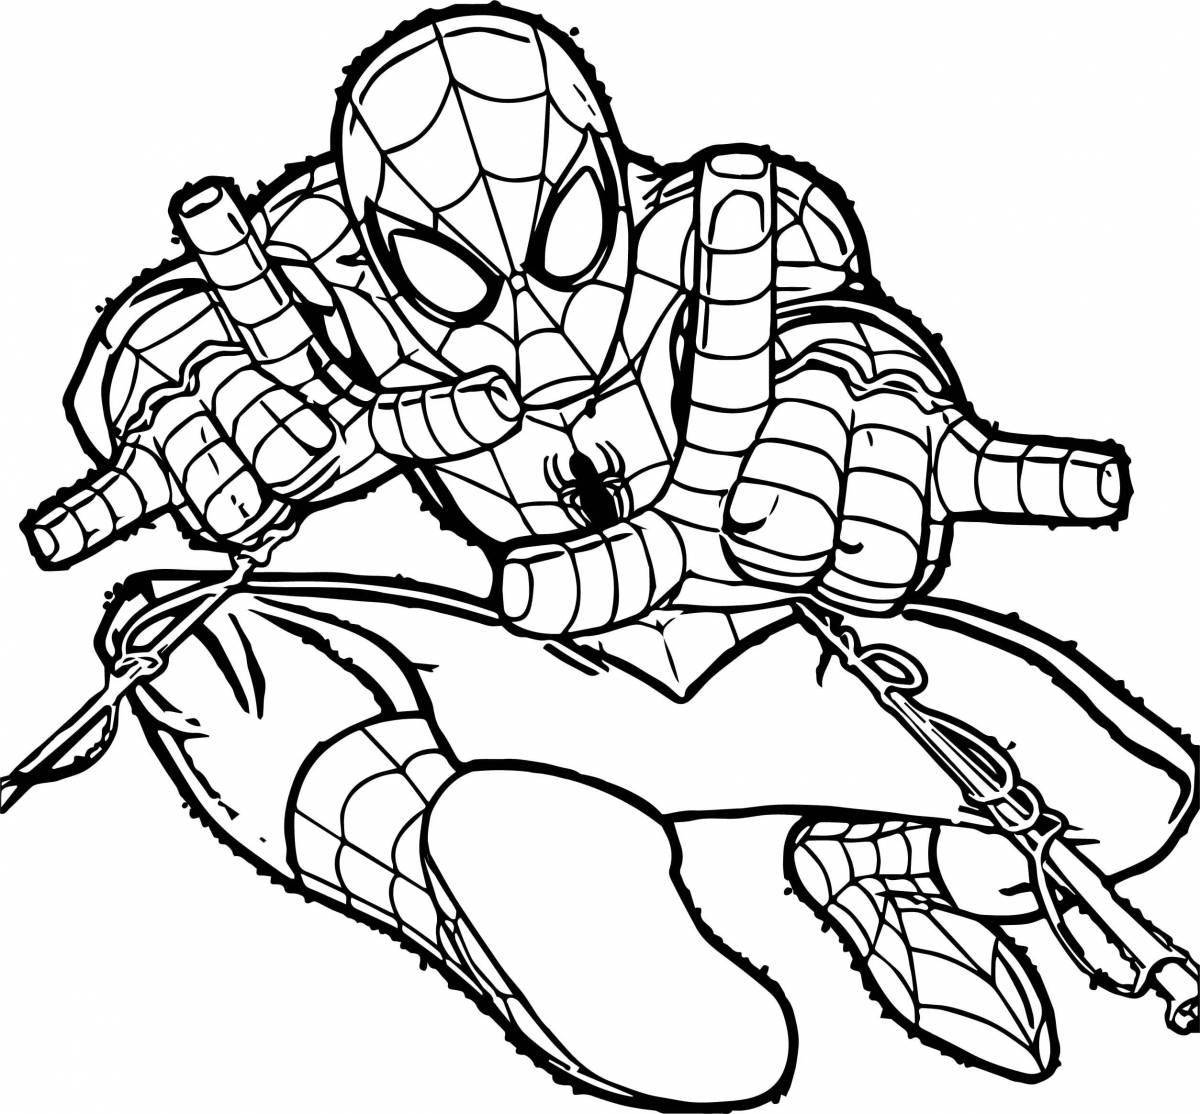 Spiderman creative coloring book for kids